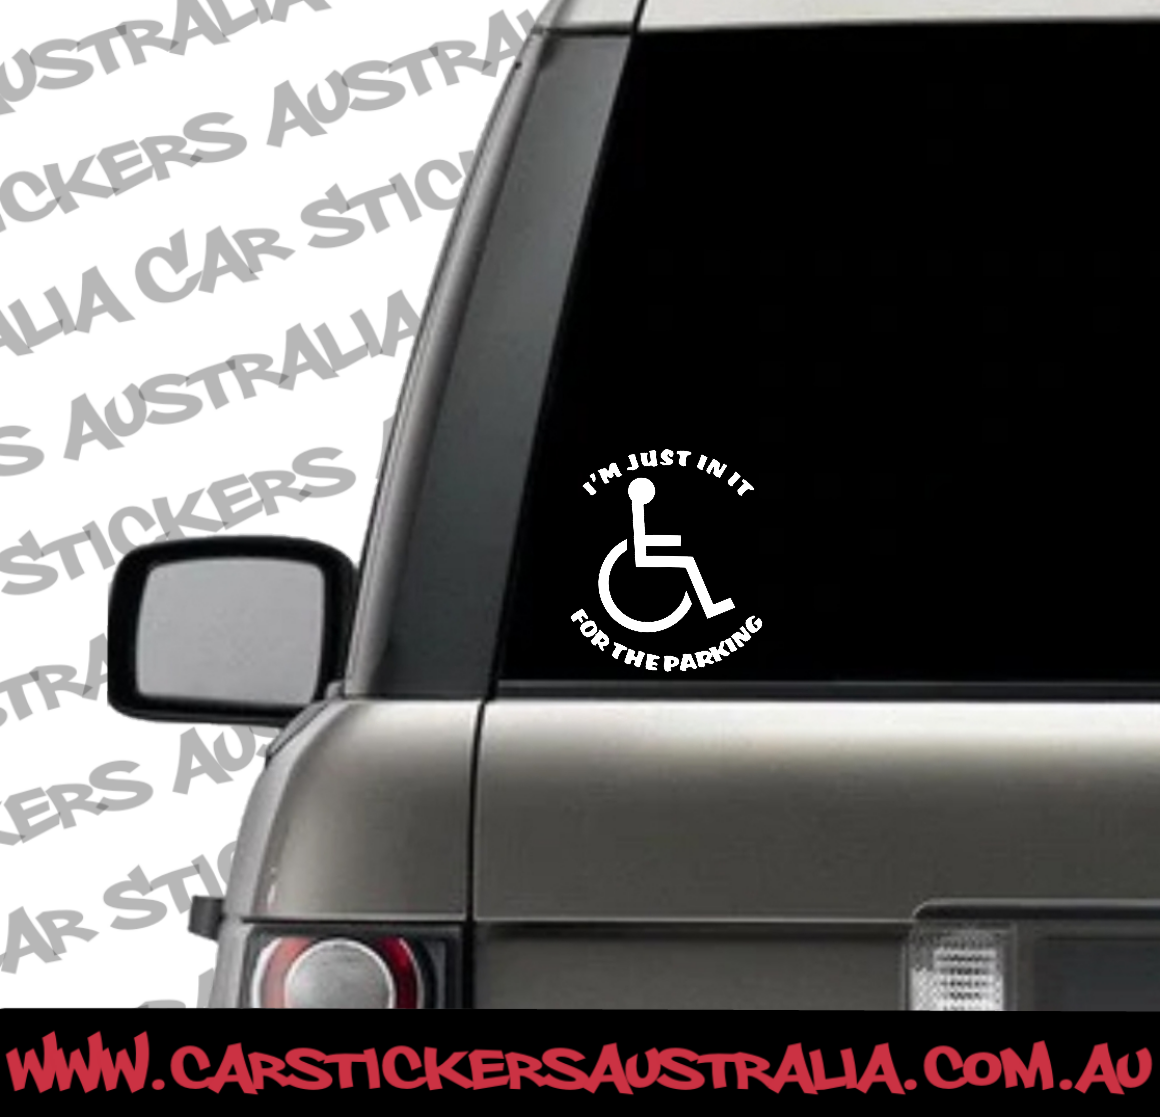 im-just-in-it-for-the-parking-car-stickers-australia